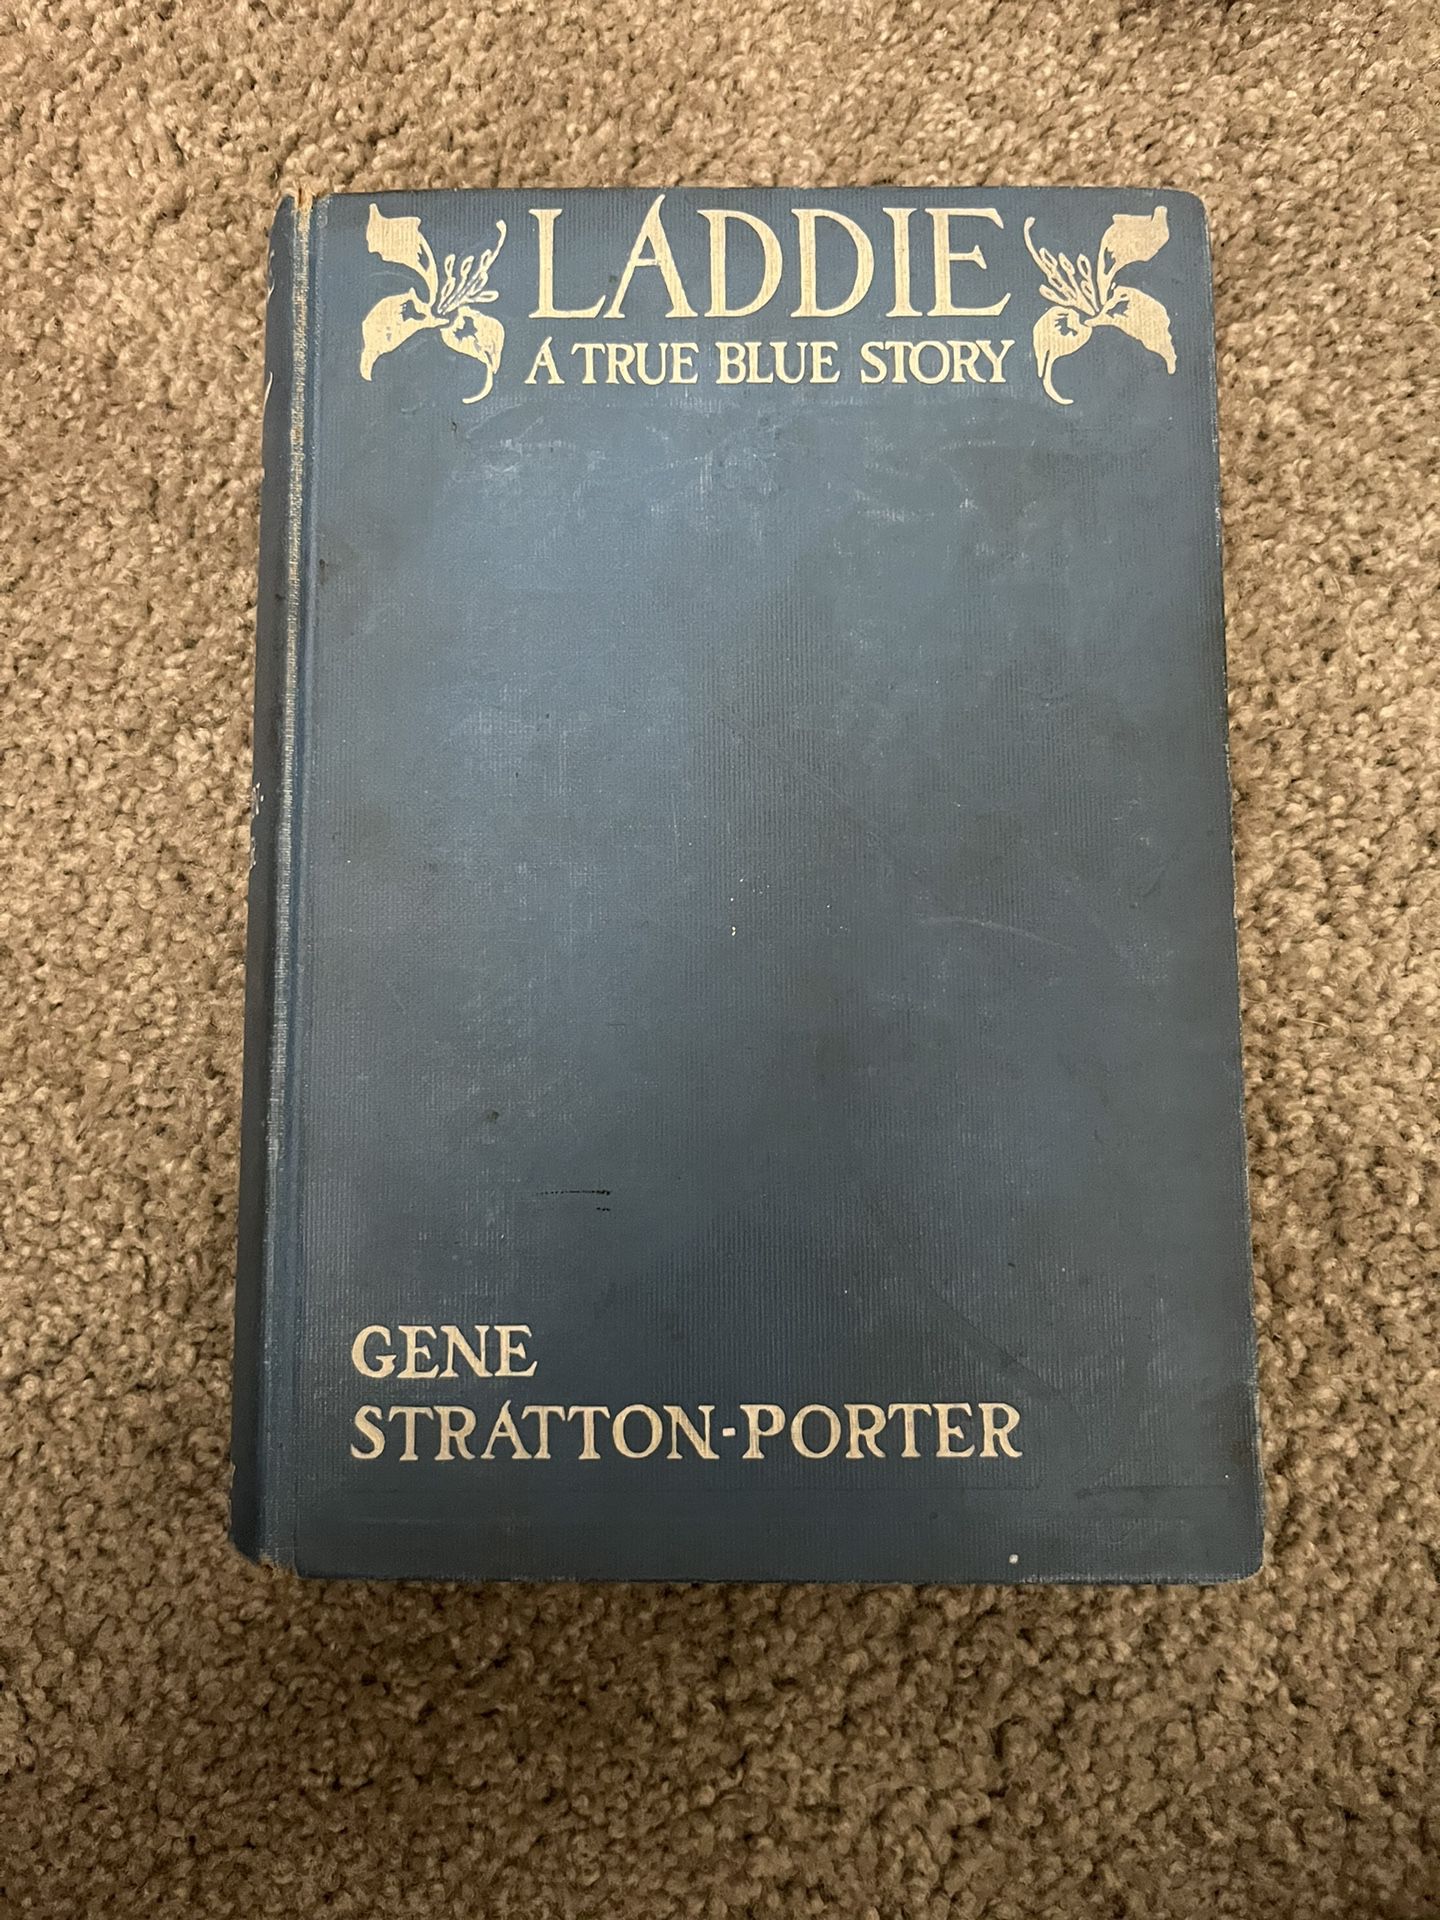 LADDIE: A True Blue Story. by Stratton-Porter, Gene (1(contact info removed))